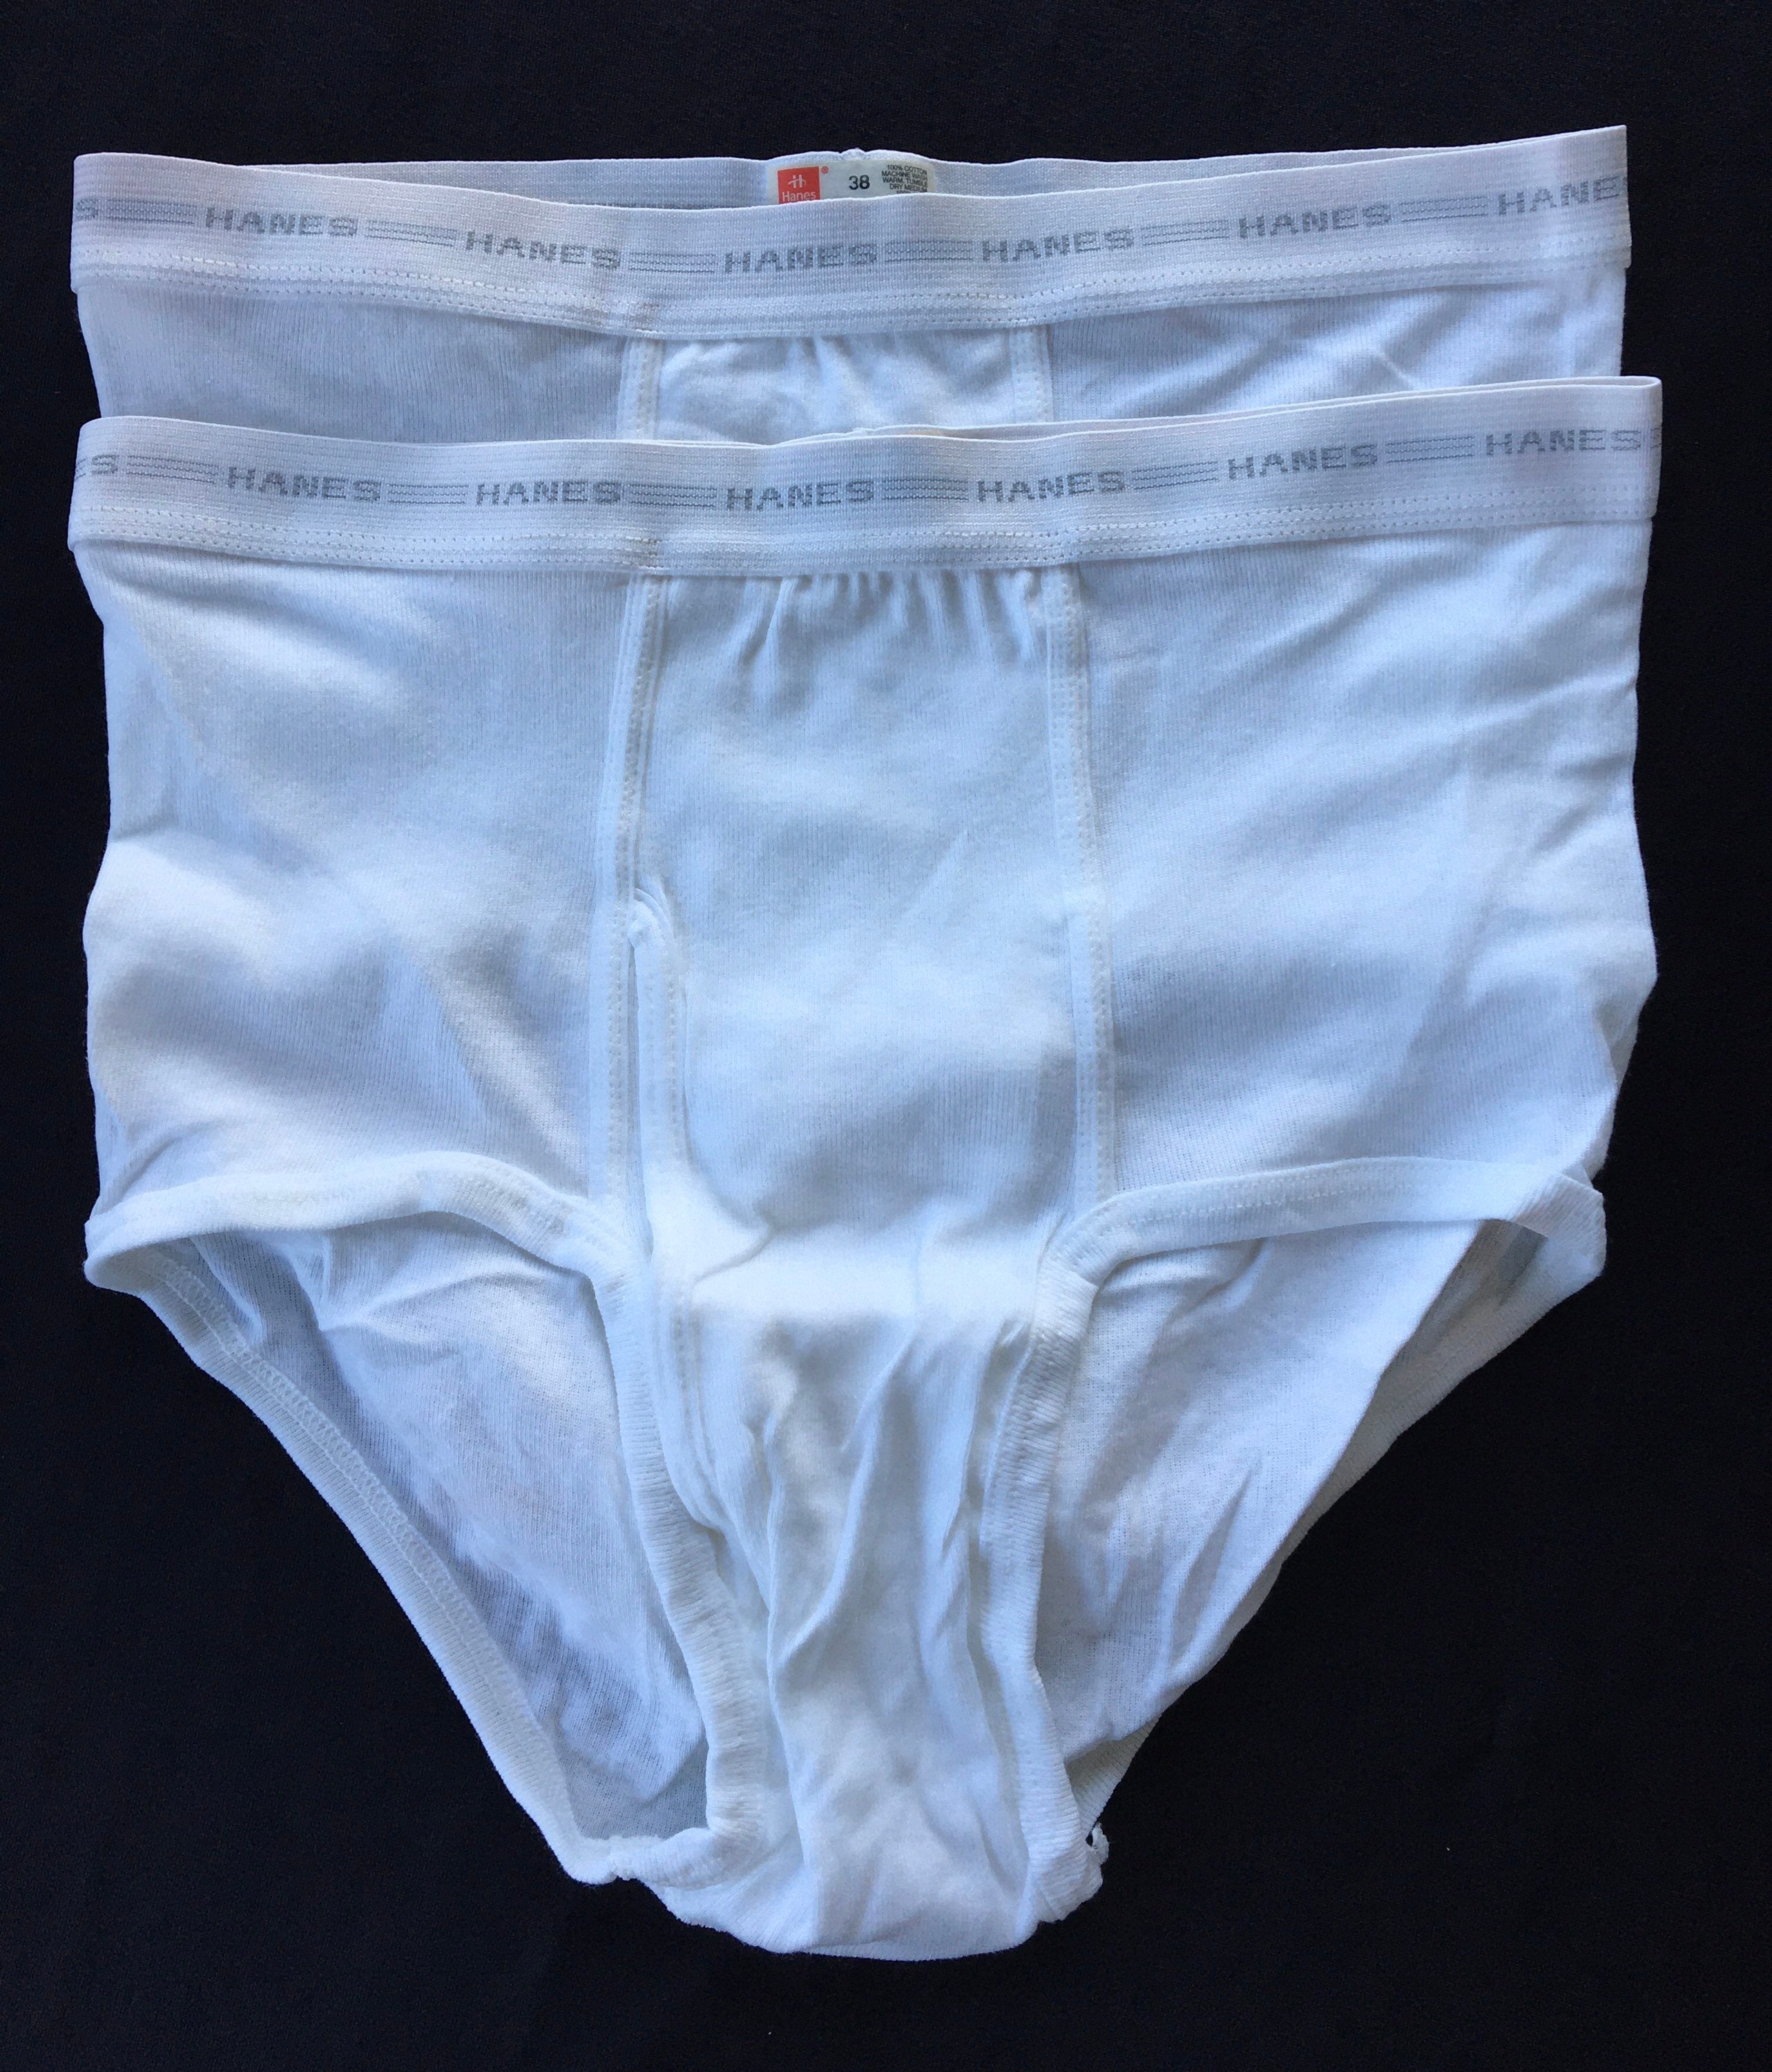 Vintage Hanes Briefs Cotton Underwear Tighty Whities Mens Size 38 Lot of 2  -  Norway